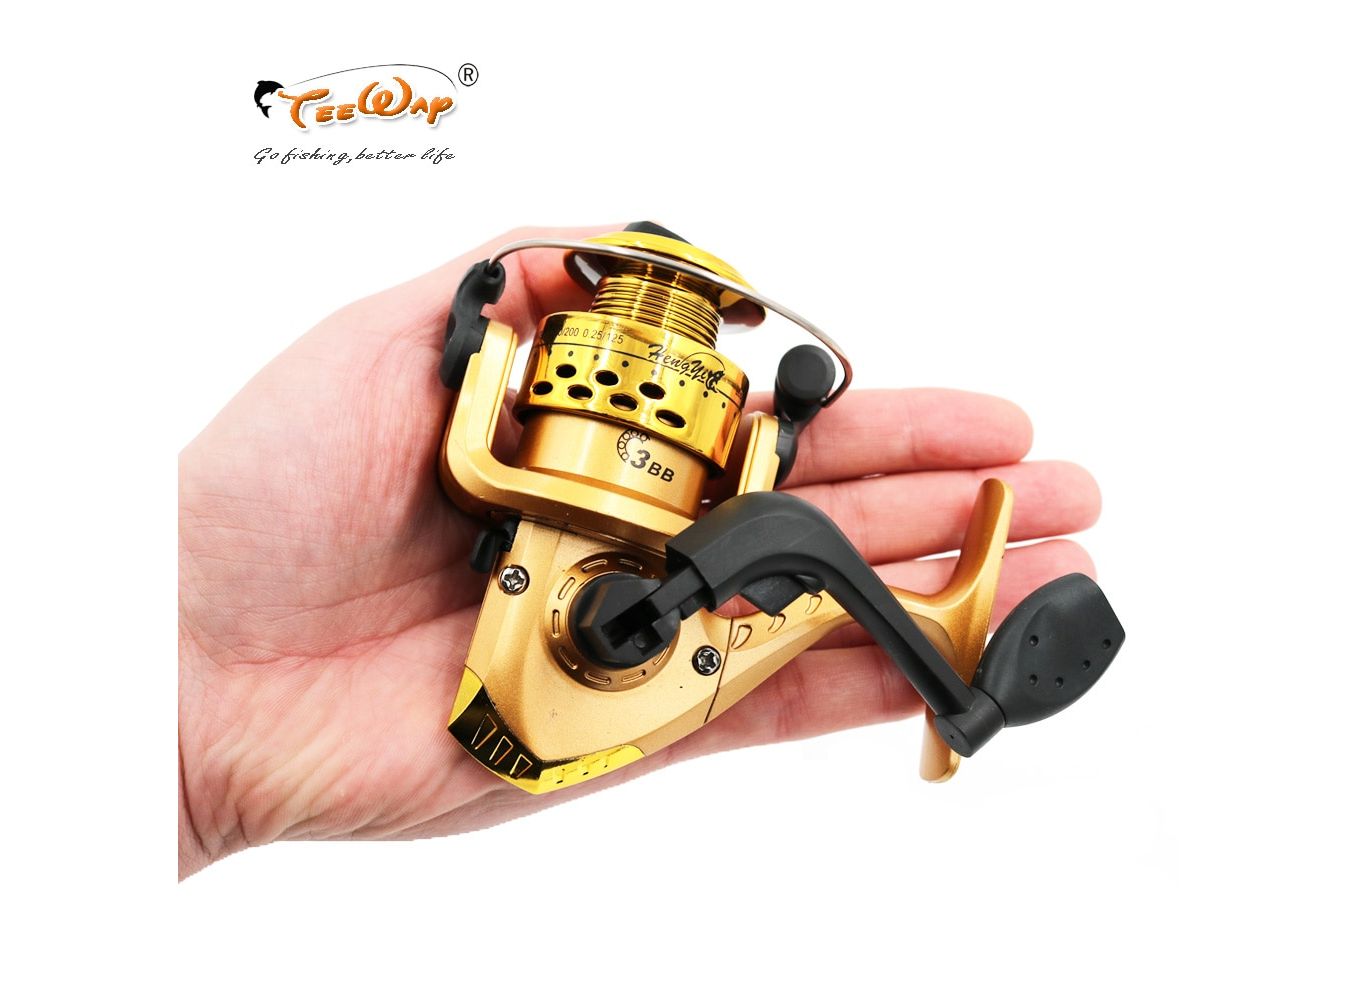 https://protechshop.co.uk/images/thumbnails/1357/1000/detailed/62/Fishing-reels-small-reel-front-drag-spinning-reels-3BB-5-2-1-feeder-coil-fishing-tackle_mbcj-y3.jpg